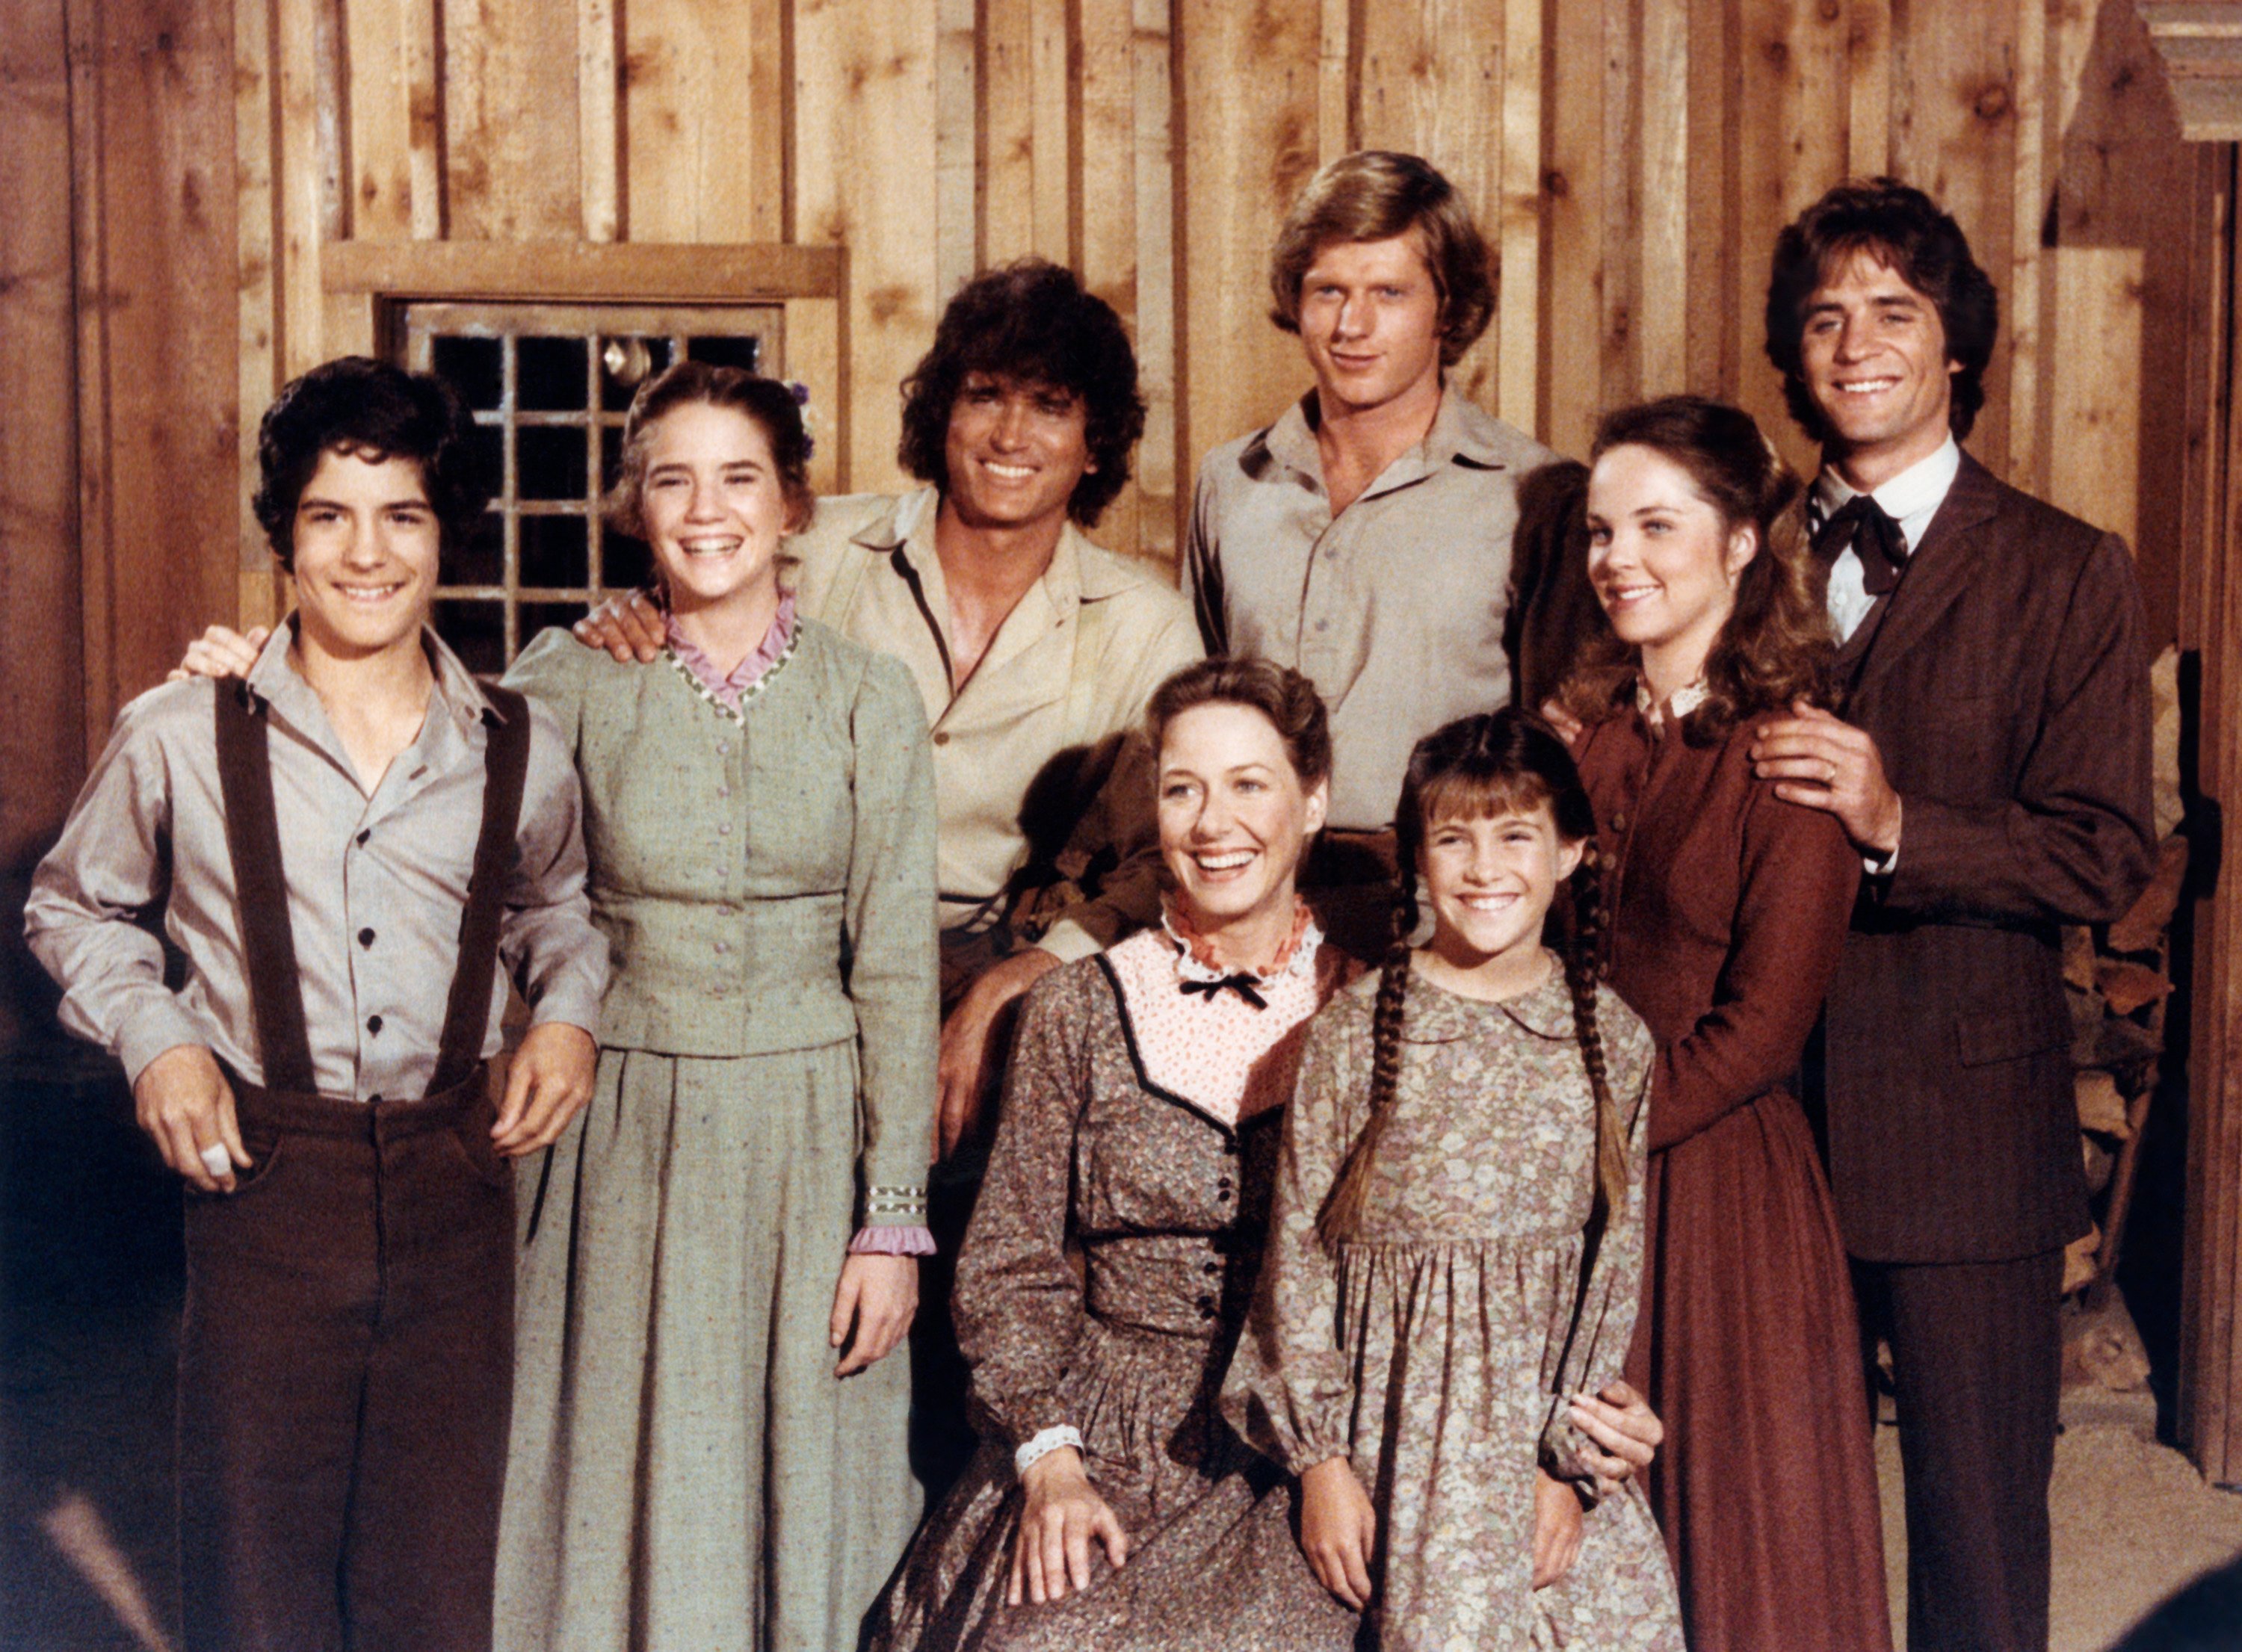 Little House on the Prairie cast posing together and smiling